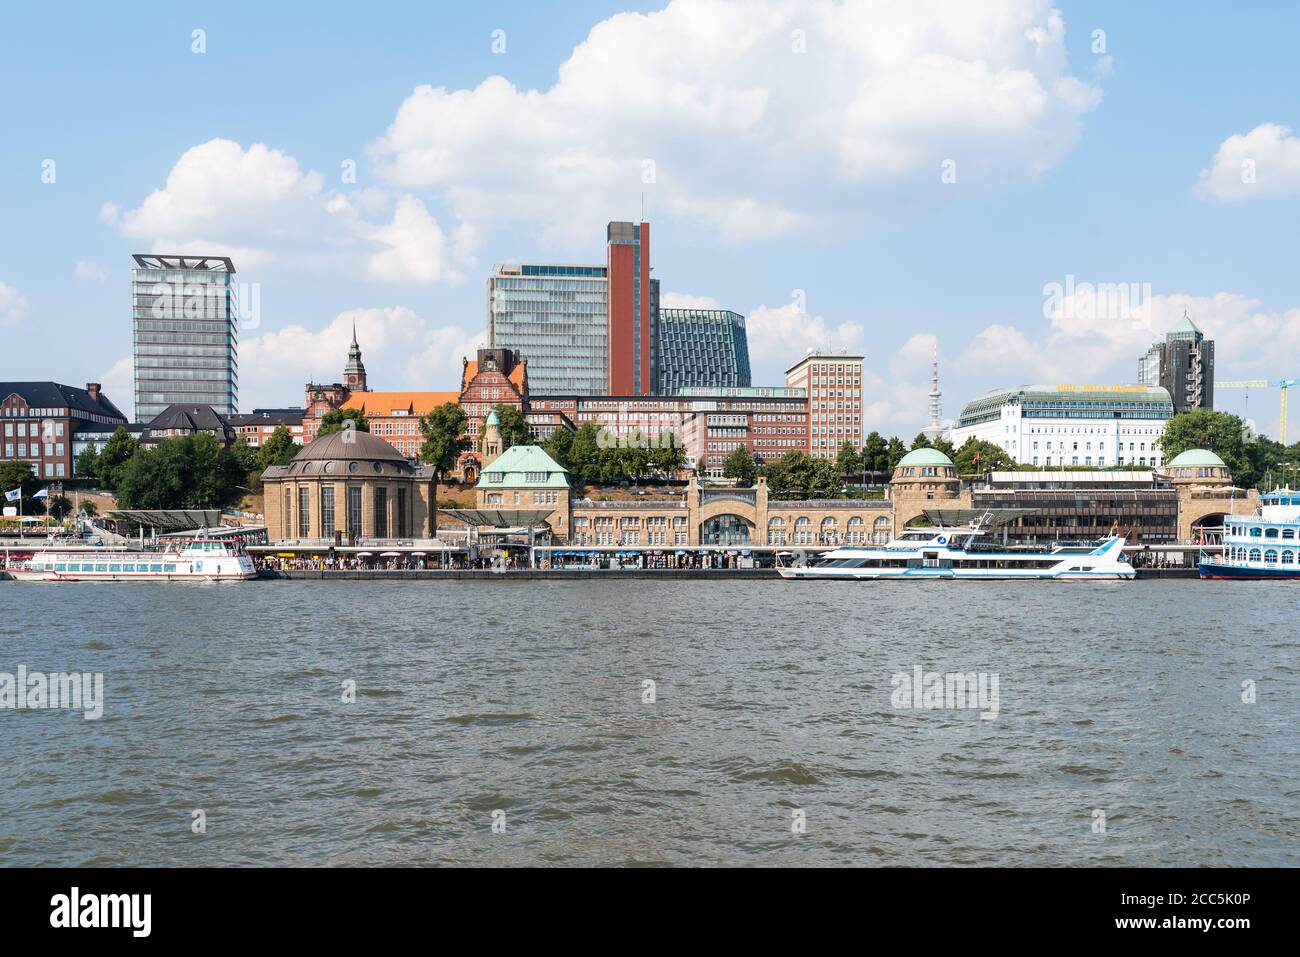 2020-08-16 Hamburg, Germany: waterside view of famous St. Pauli Piers and River Elbe against blue summer sky Stock Photo